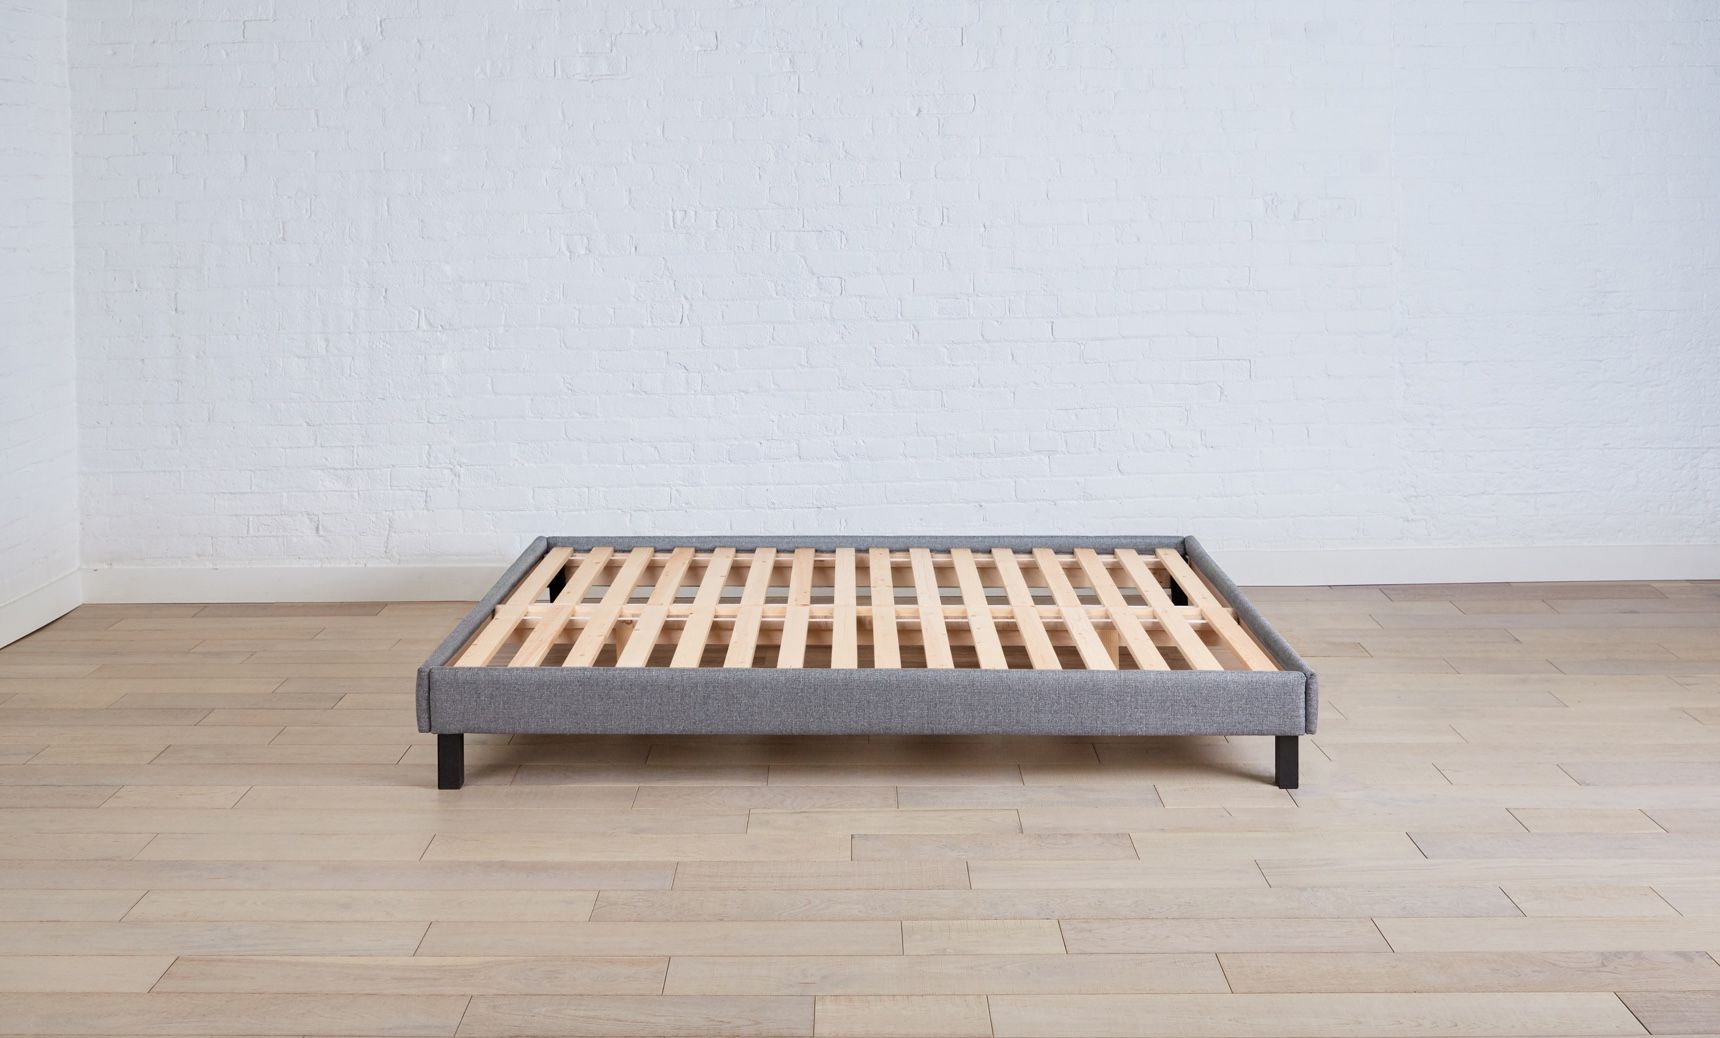 The Endy Platform Bed Frame in Heather Grey colourway